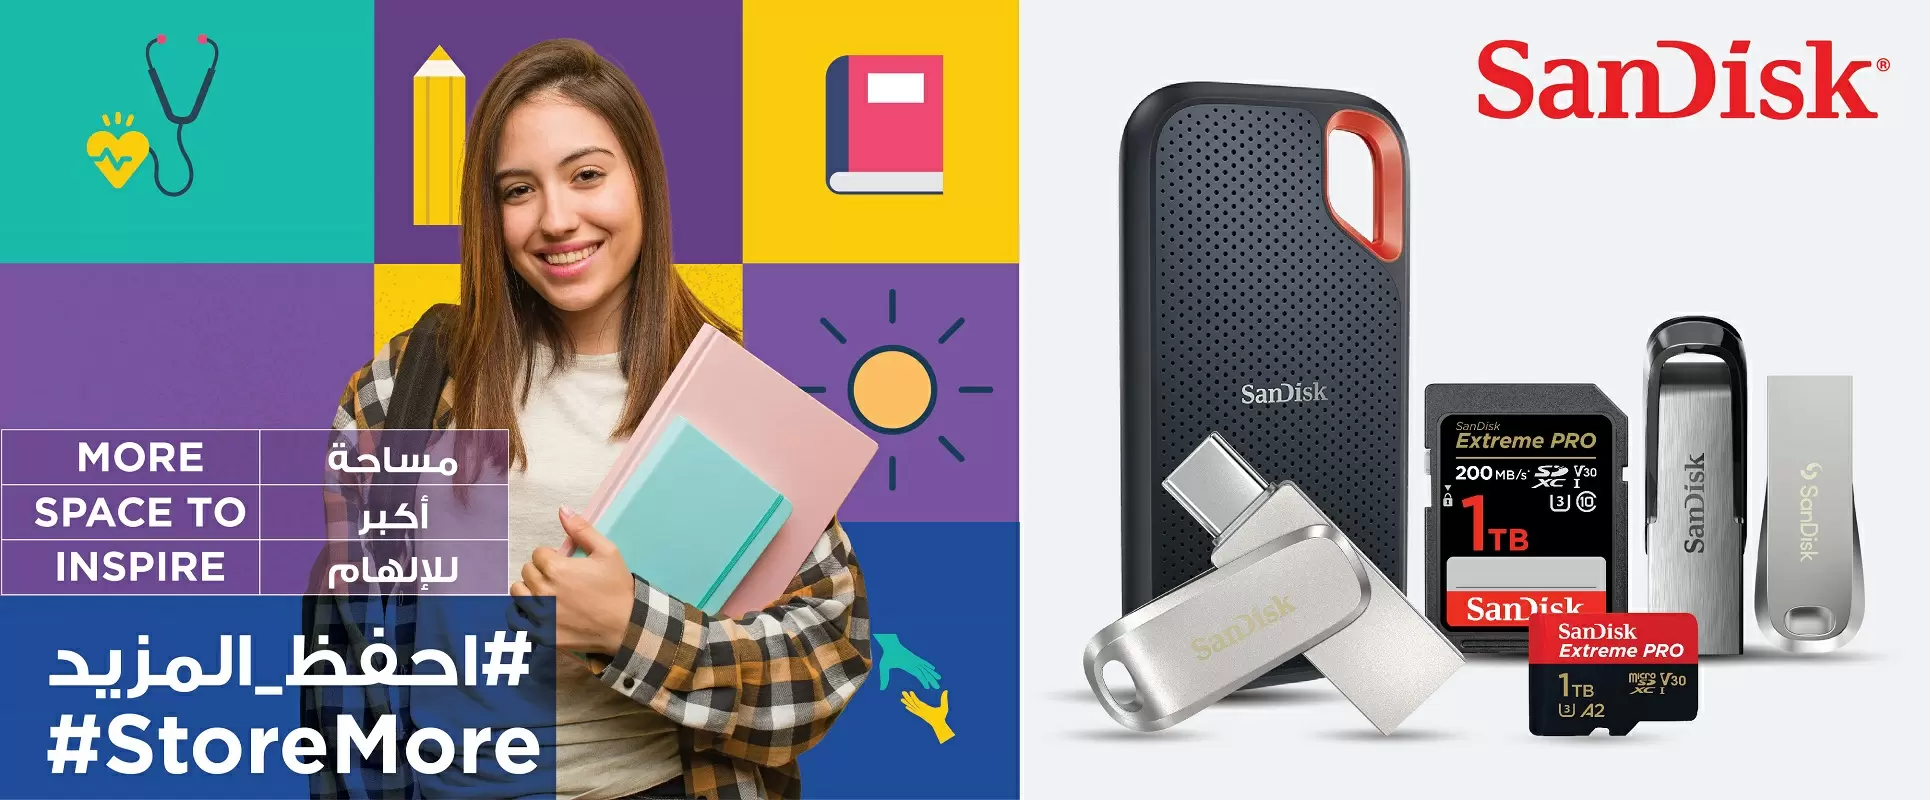 SanDisk and WD Back to school offers